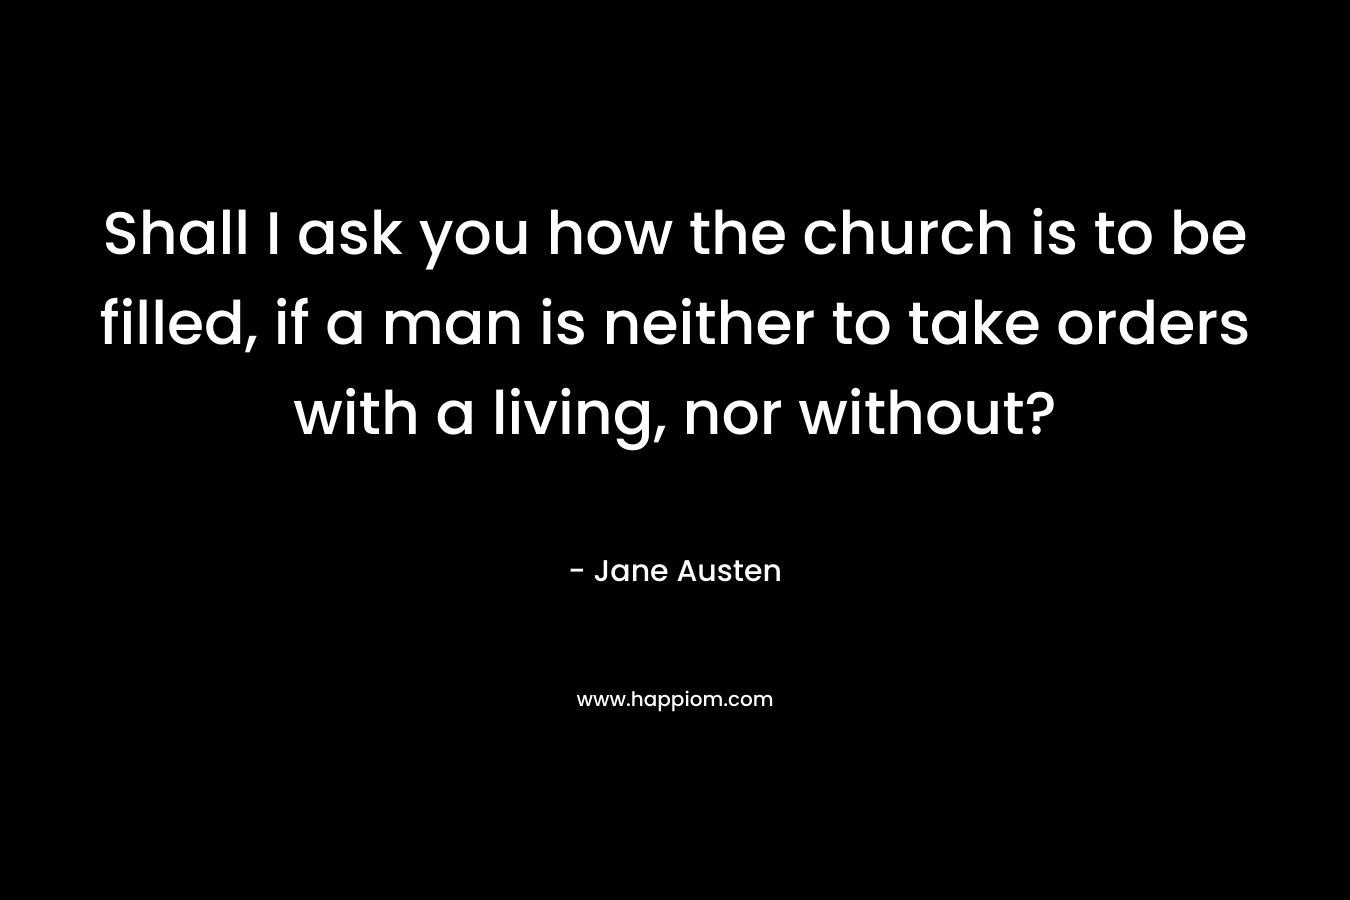 Shall I ask you how the church is to be filled, if a man is neither to take orders with a living, nor without?